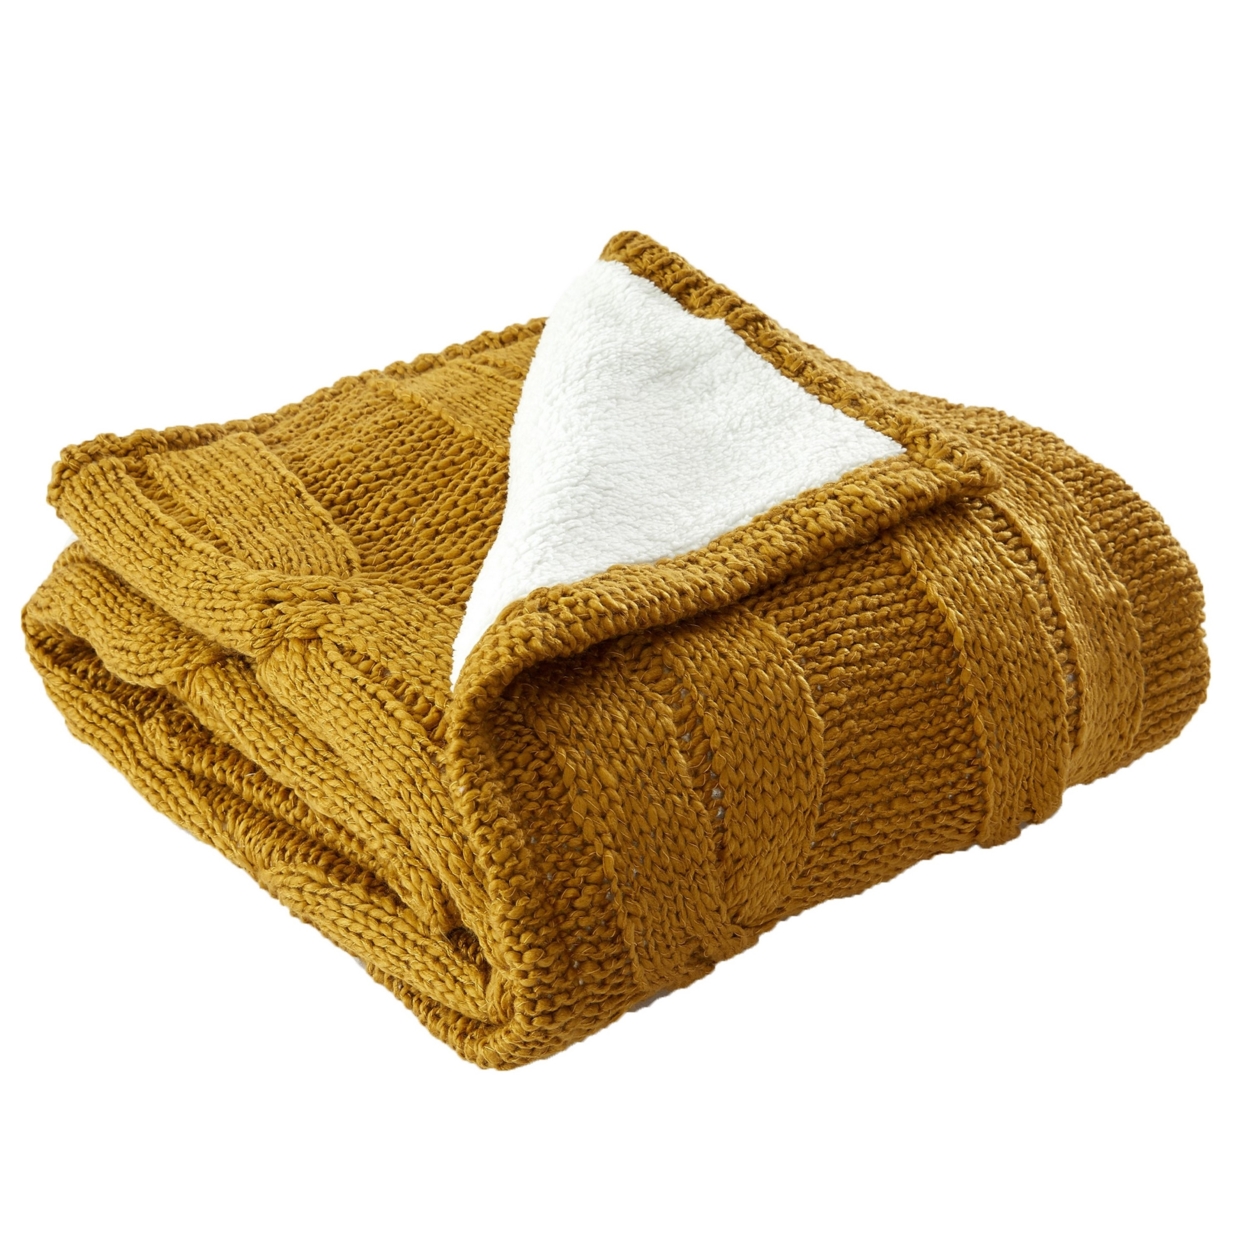 Lois 50 X 60 Throw Blanket With Cable Knit And Sherpa, Acrylic, Gold, White- Saltoro Sherpi